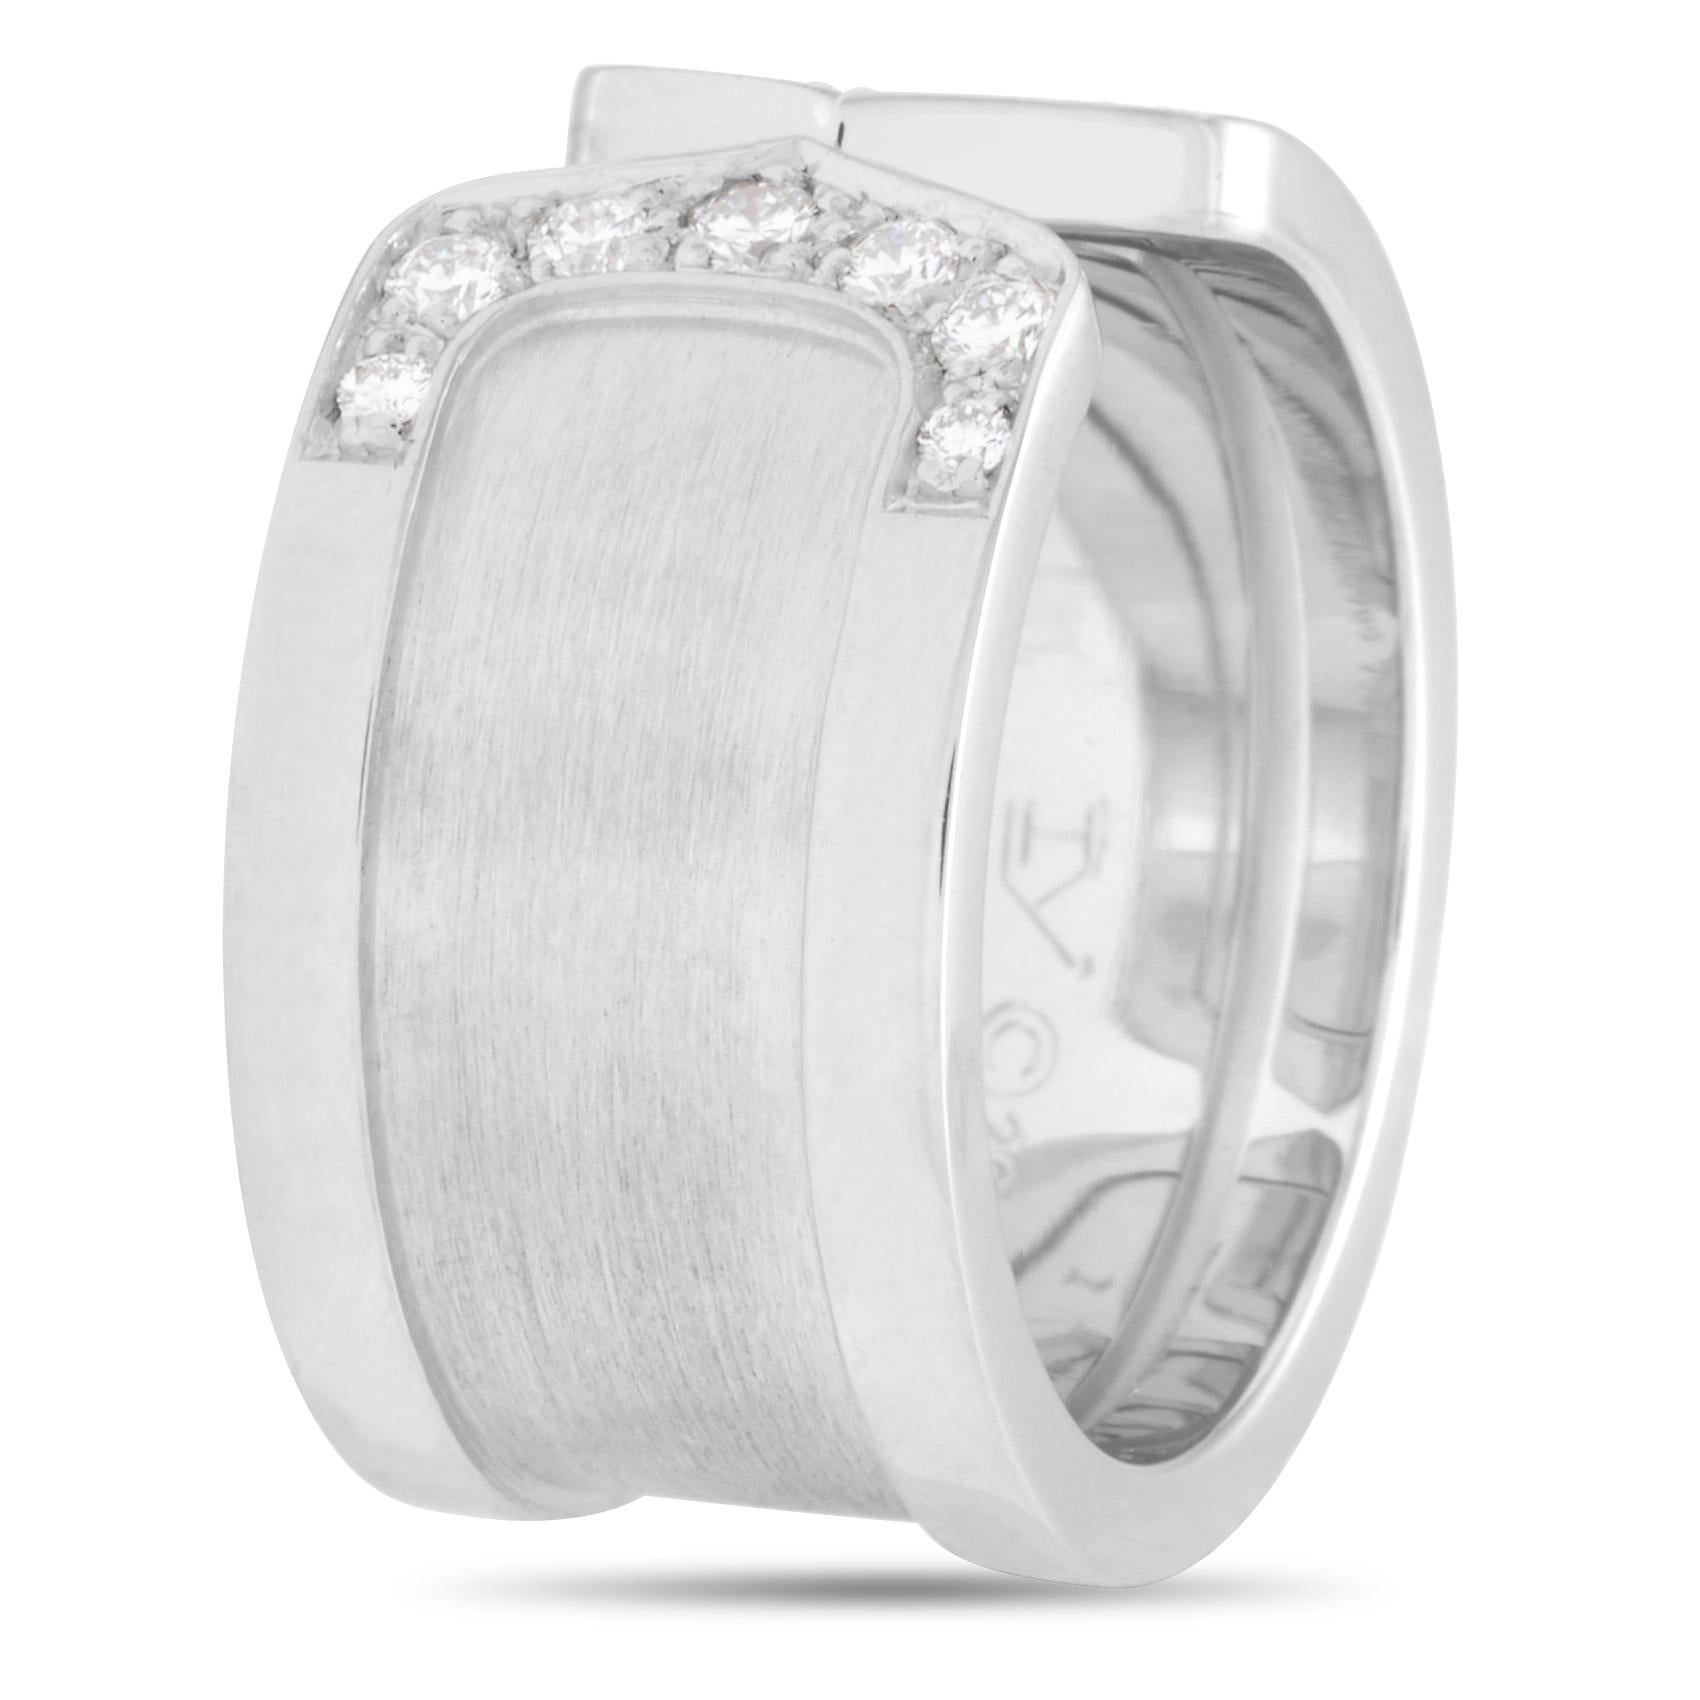 The Cartier Double C ring is made of 18K white gold and set with scintillating diamond stones. The ring weighs 10.8 grams and boasts band thickness of 5 mm.. The ring weighs 10.9 grams and boasts band thickness of 10 mm.

This jewelry piece is